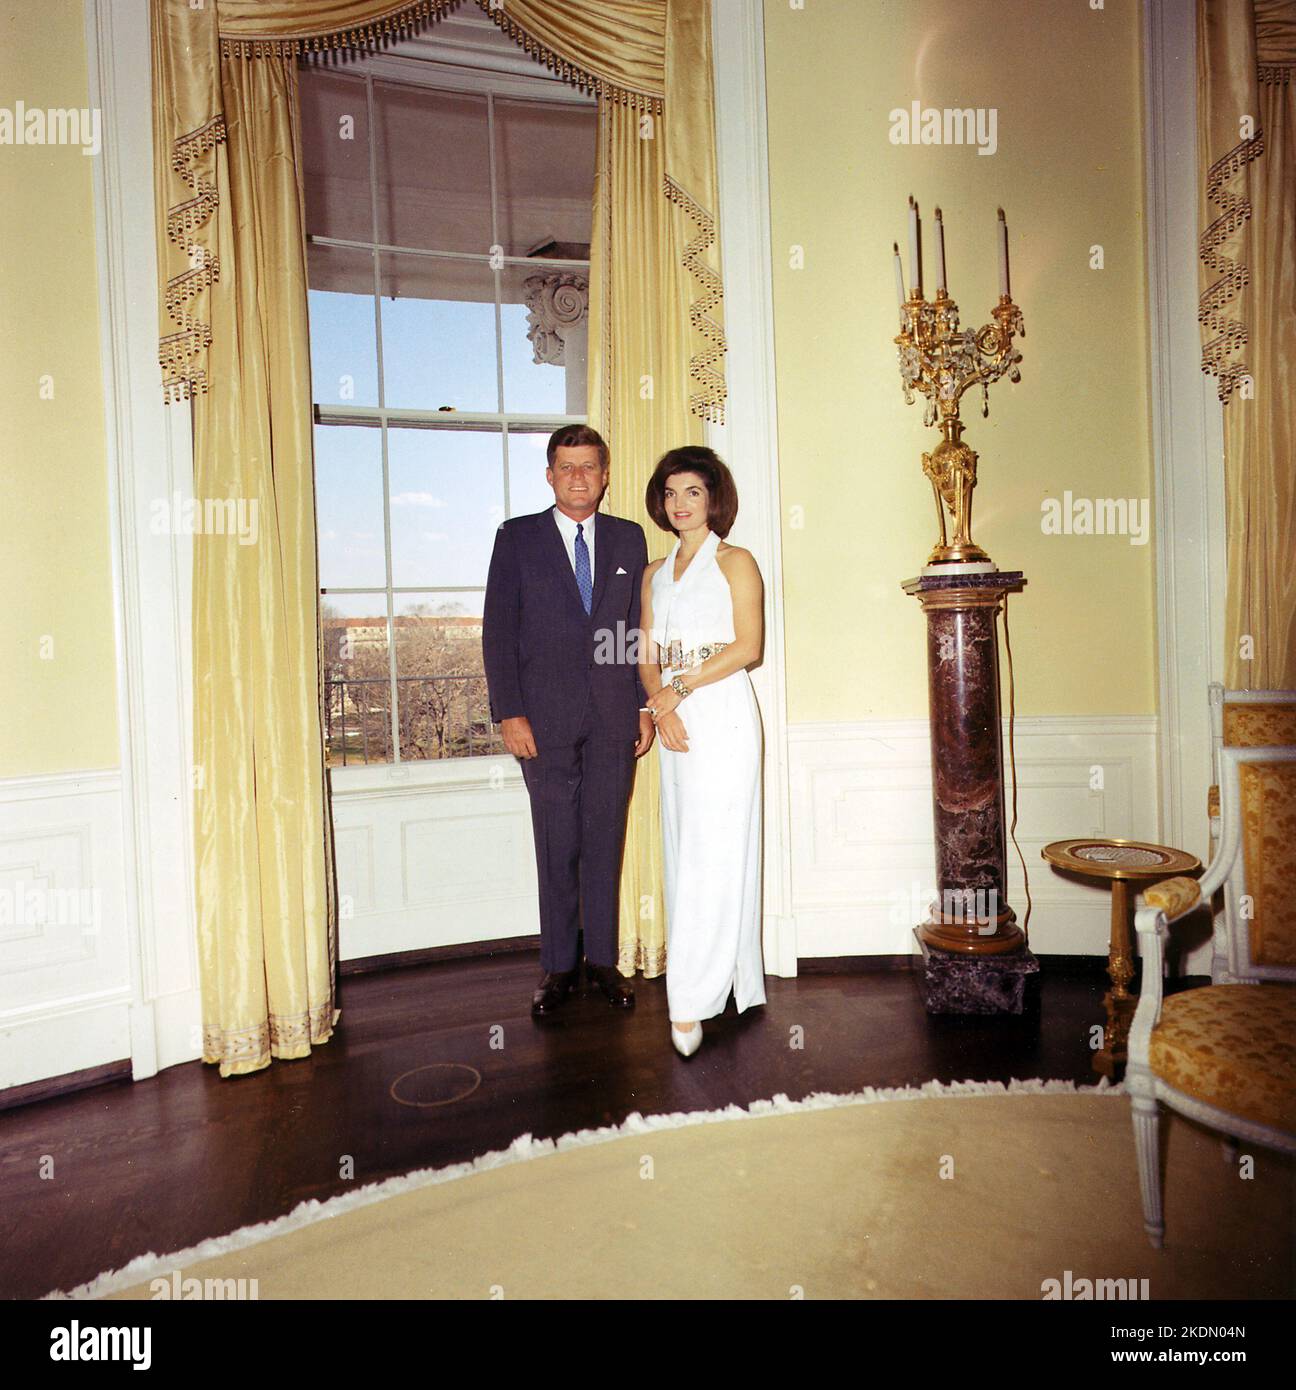 President and First Lady, Portrait Photograph. President Kennedy, Mrs. Kennedy. White House, Yellow Oval Room. Cecil (Cecil William) Stoughton phoographer Stock Photo